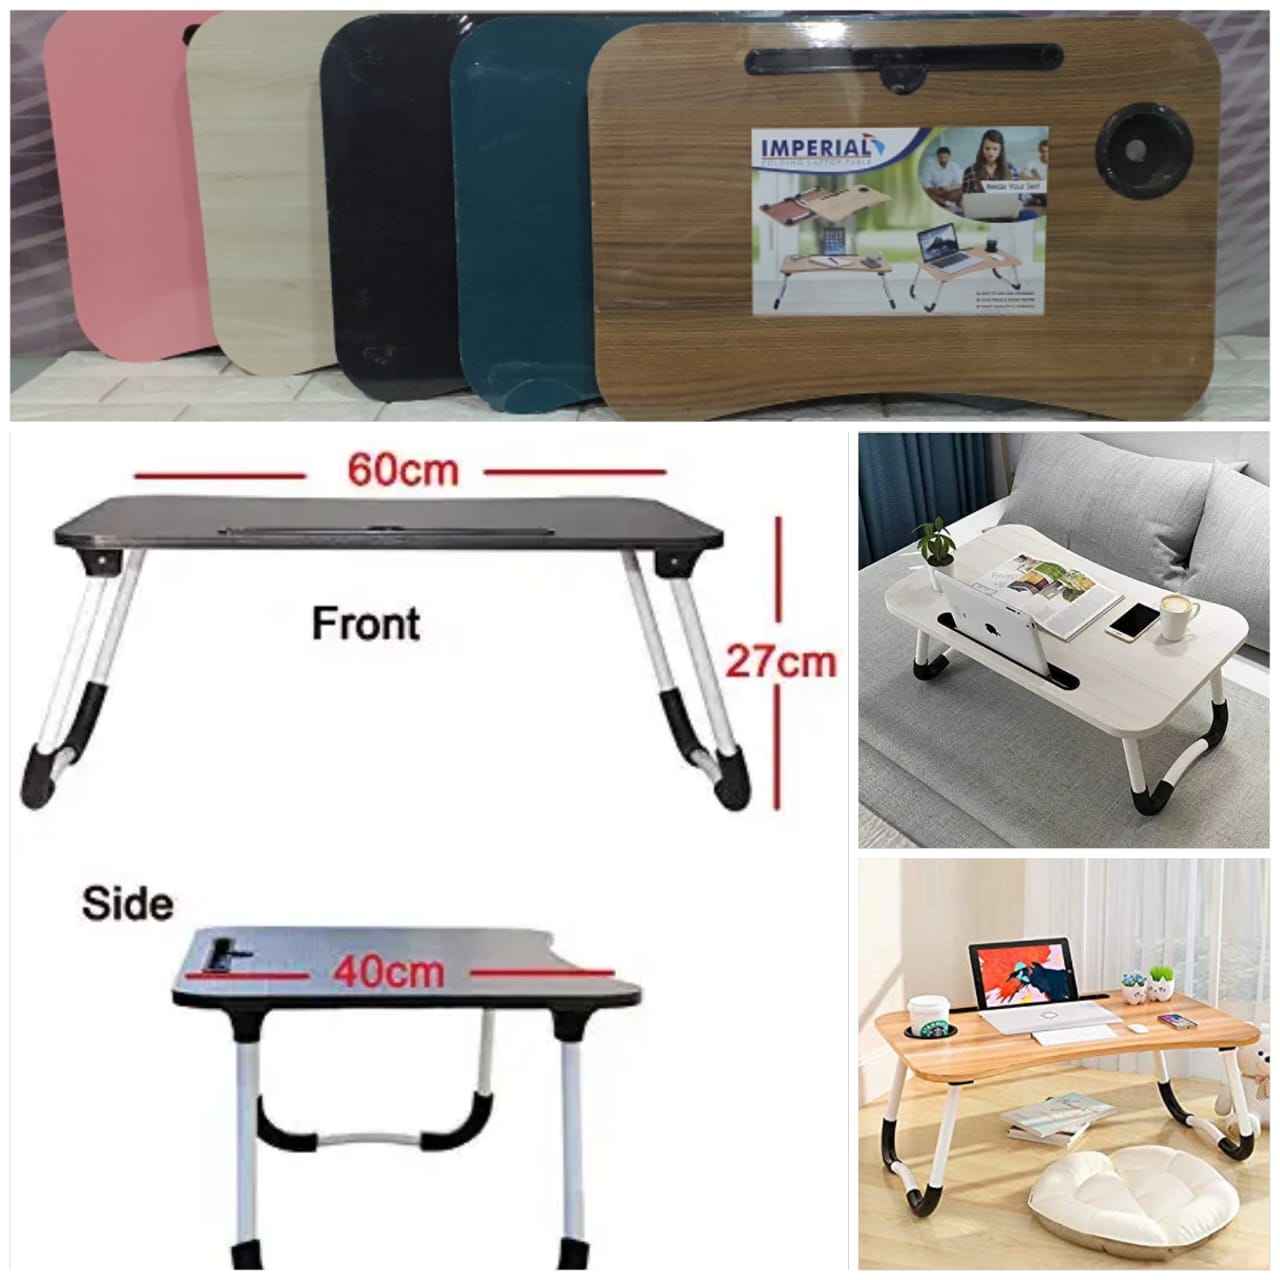 Laptop Table Multi functional laptop table Portable laptop table - Study table - Mini Table - Mini wood table - Wood laptop table